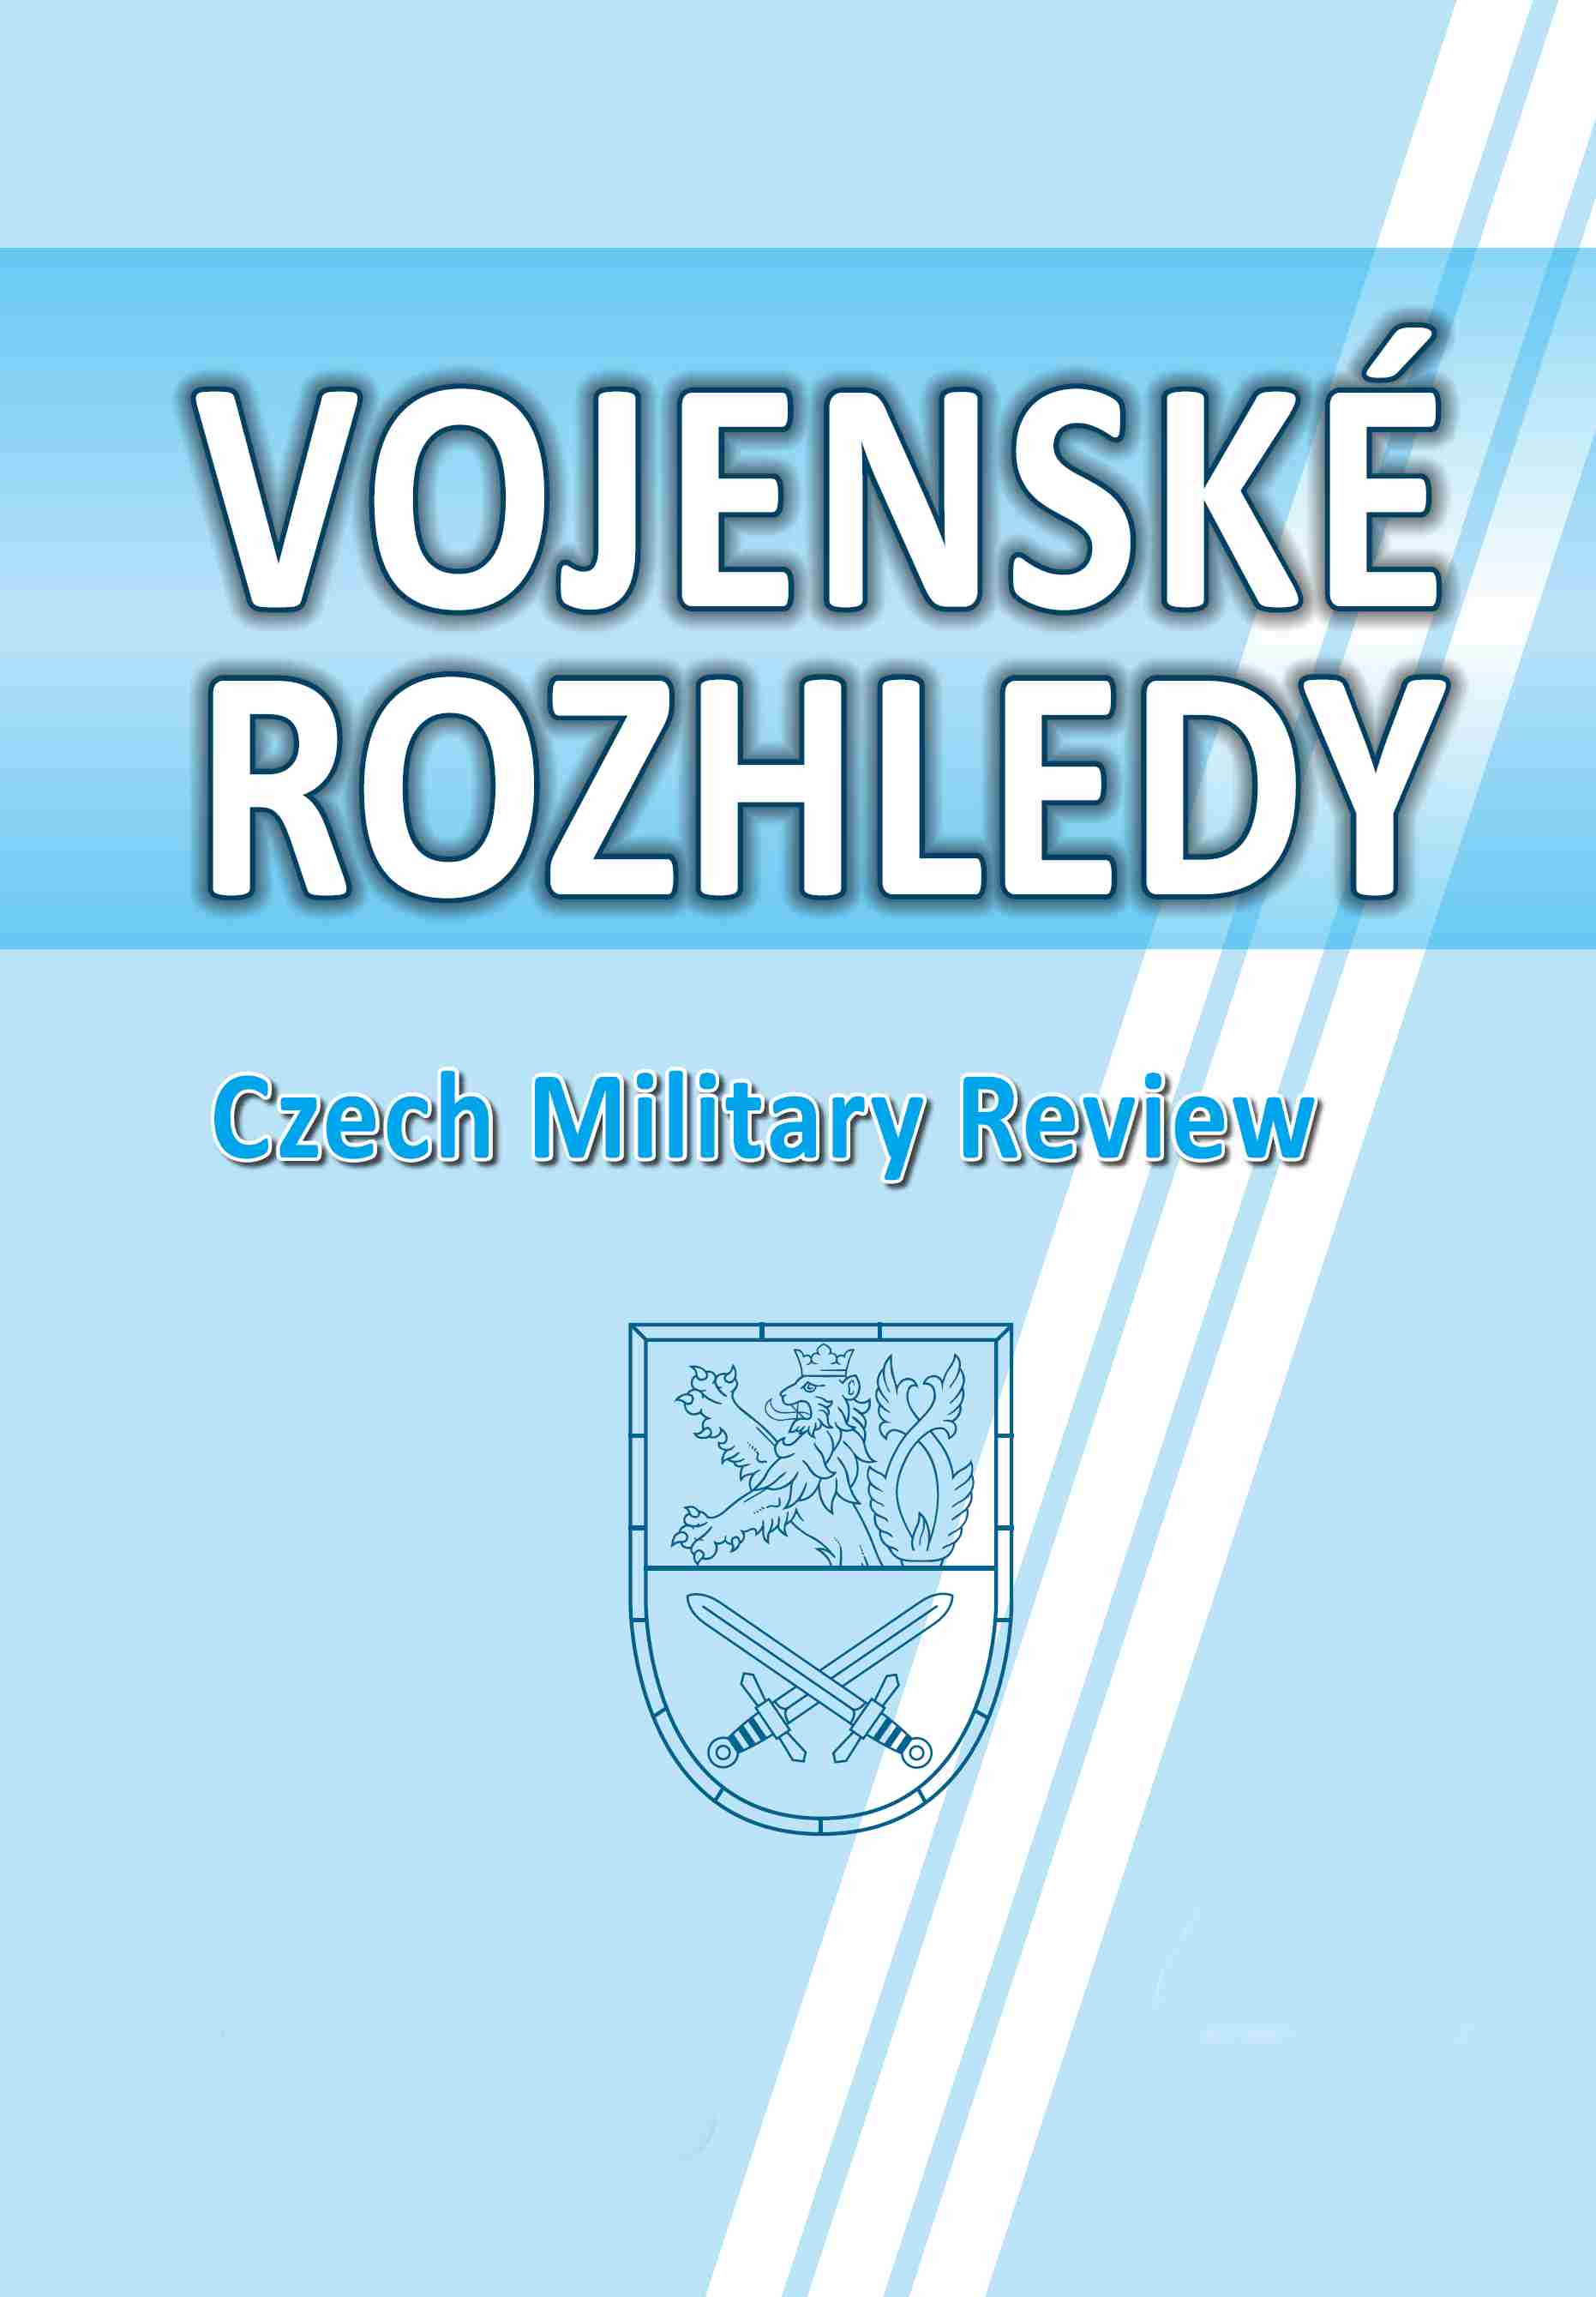 Czech Military Review